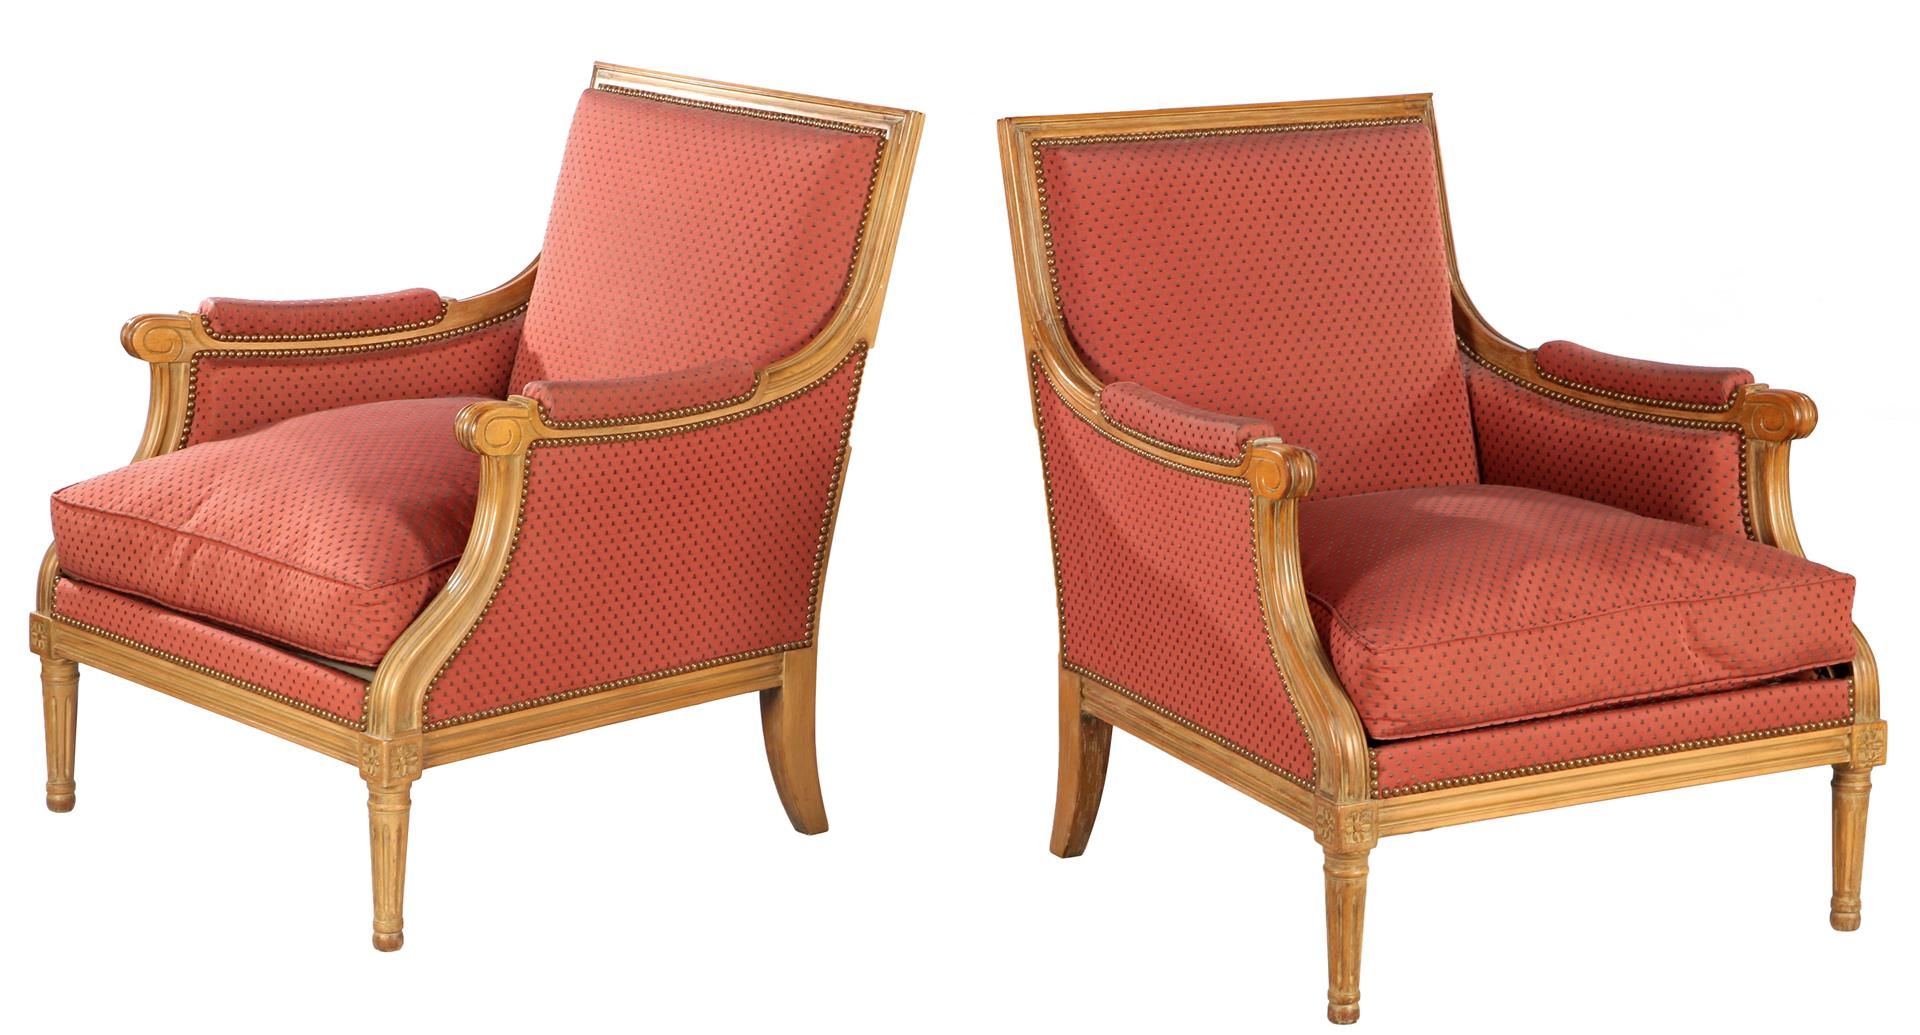 2 decorated walnut armchairs in Louis XVI style